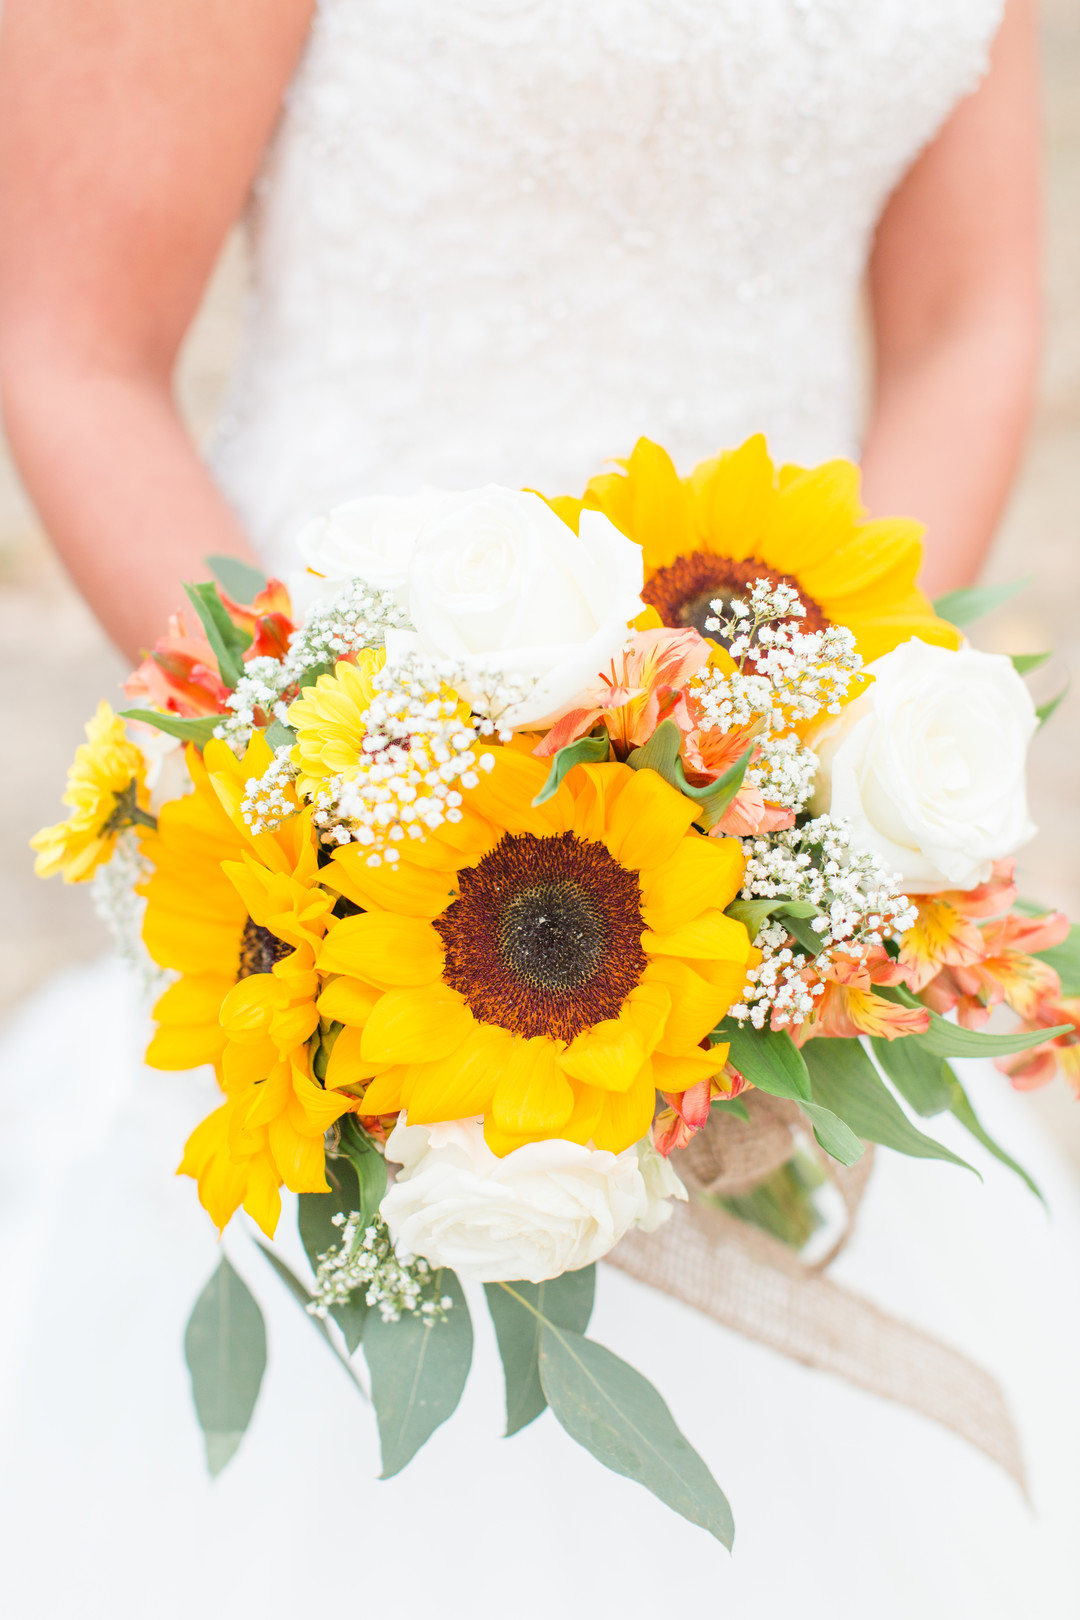 Bright fall sunflower wedding two brides autumn white lace dresses bouquet